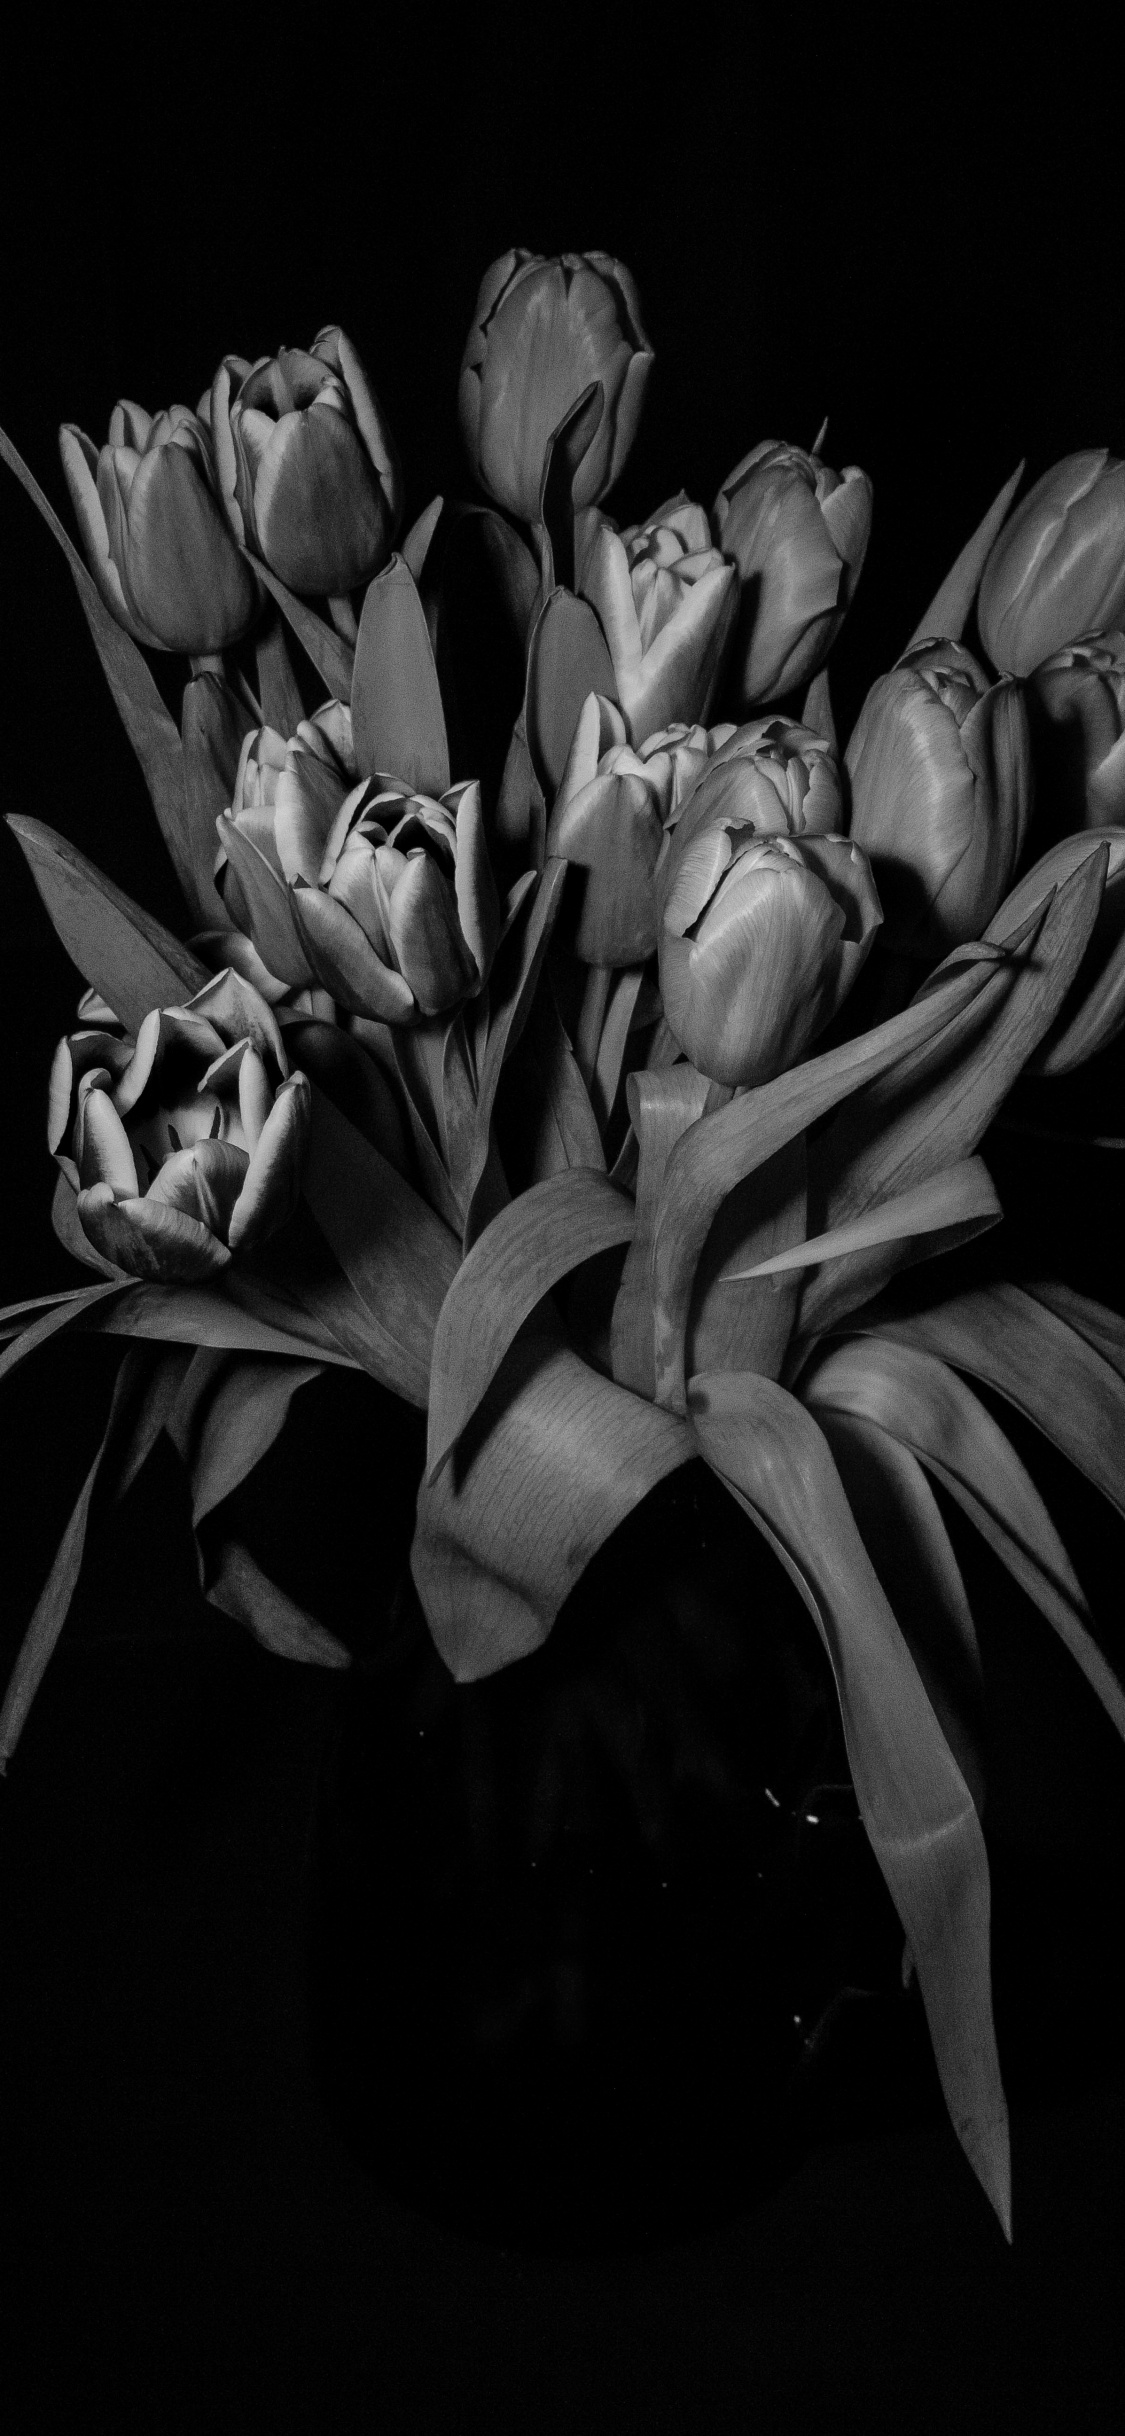 Grayscale Photo of Tulips in Bloom. Wallpaper in 1125x2436 Resolution